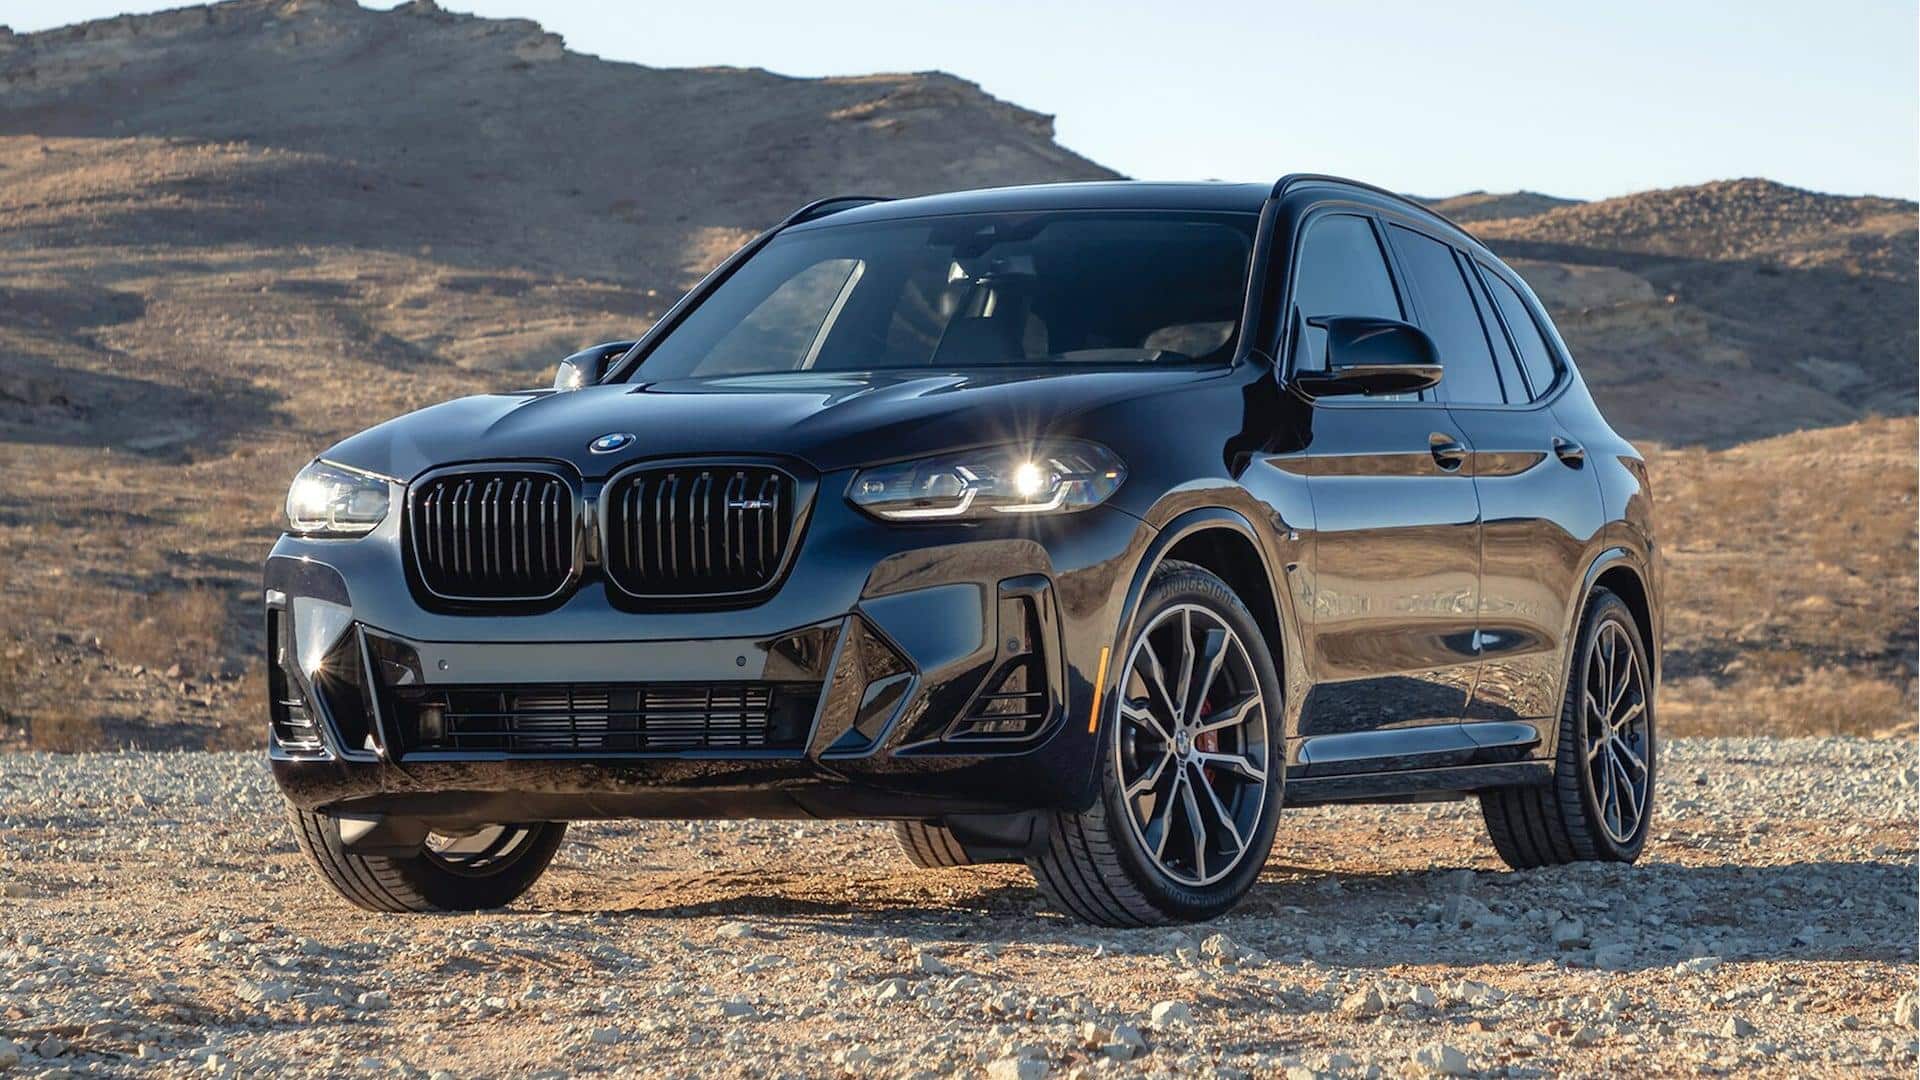 BMW X3 M40i's bookings open in India: Check 5 alternatives